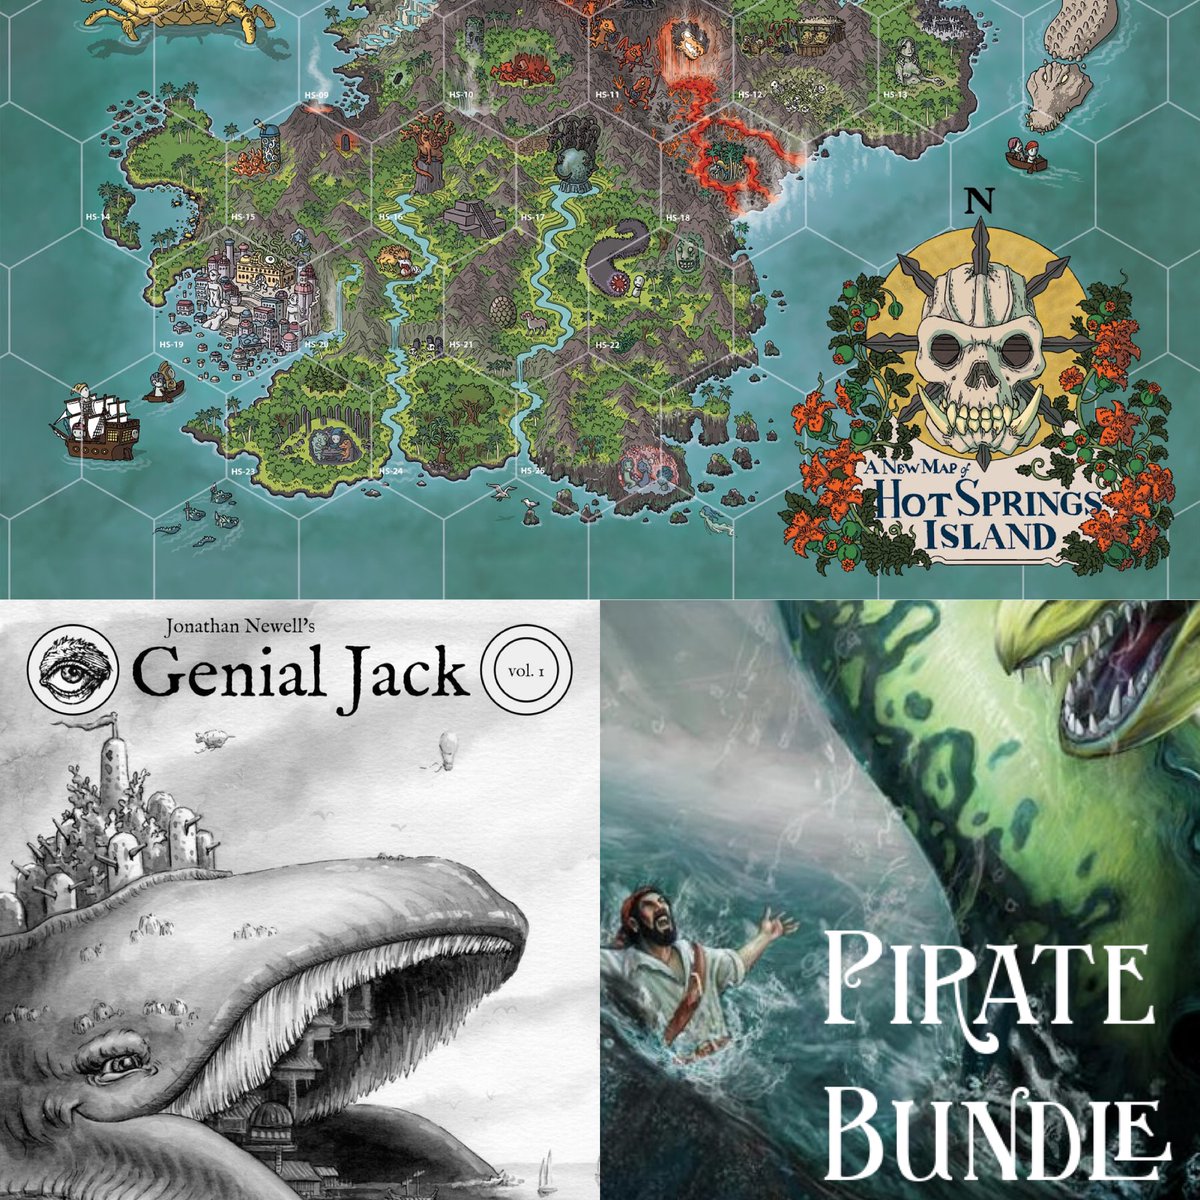 Mix @Edweirdian's Genial Jack with @vyderac's Hot Springs Island and @Limitless5e's Pirate Bundle and you will have the great nautical 5e game EVER! #swordfishislands #genialjack #pirates #piratebundle #limitlessadventures #lostpages #hotspringsisland #dungeonsanddragons #dnd #5e